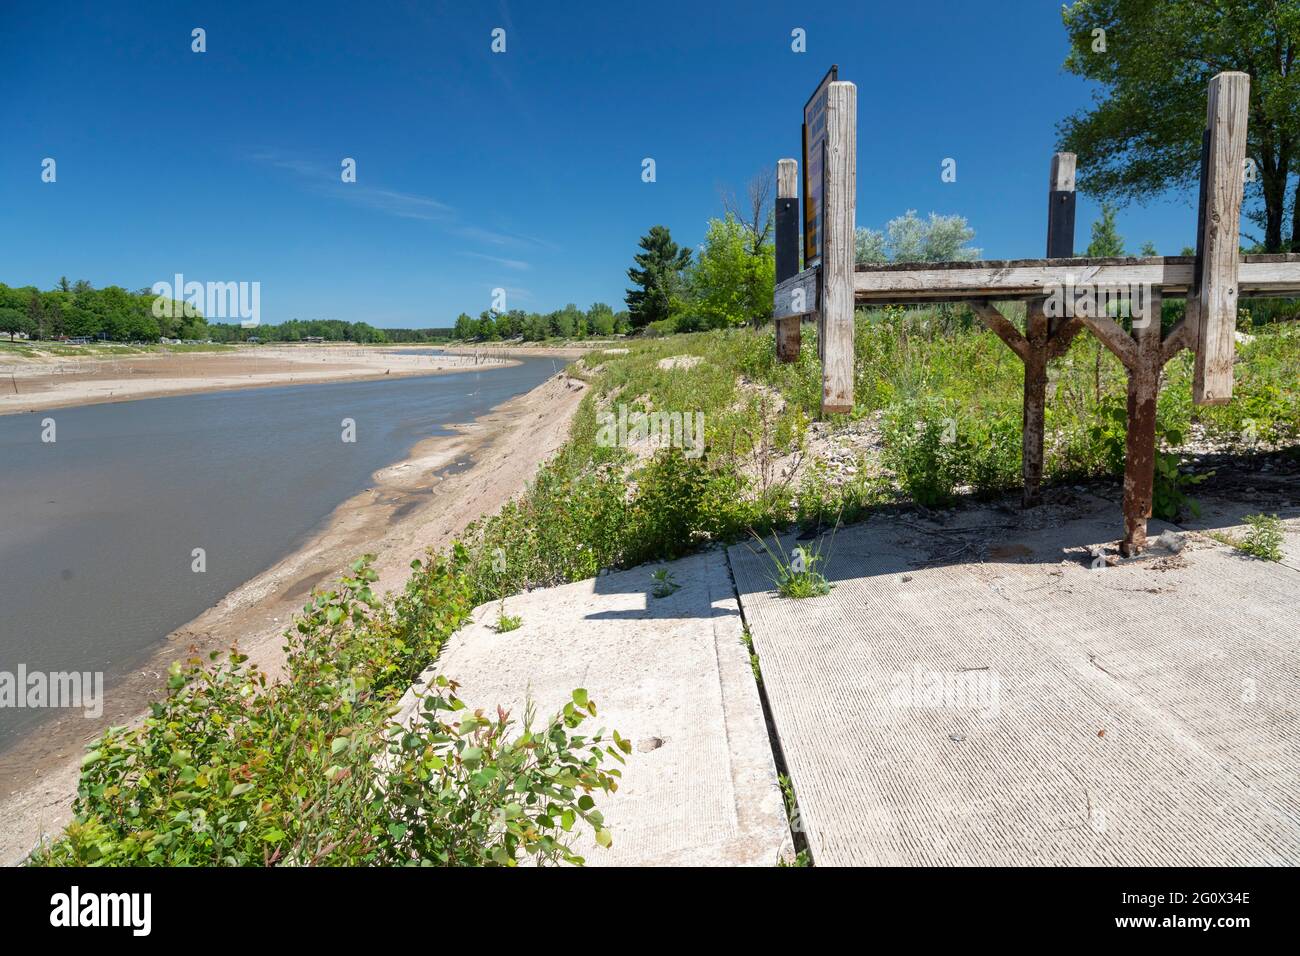 Edenville, Michigan - The aftermath of 2020 flooding on the Tittabawassee and Tobacco Rivers, which breached poorly-maintained dams and drained Sanfor Stock Photo